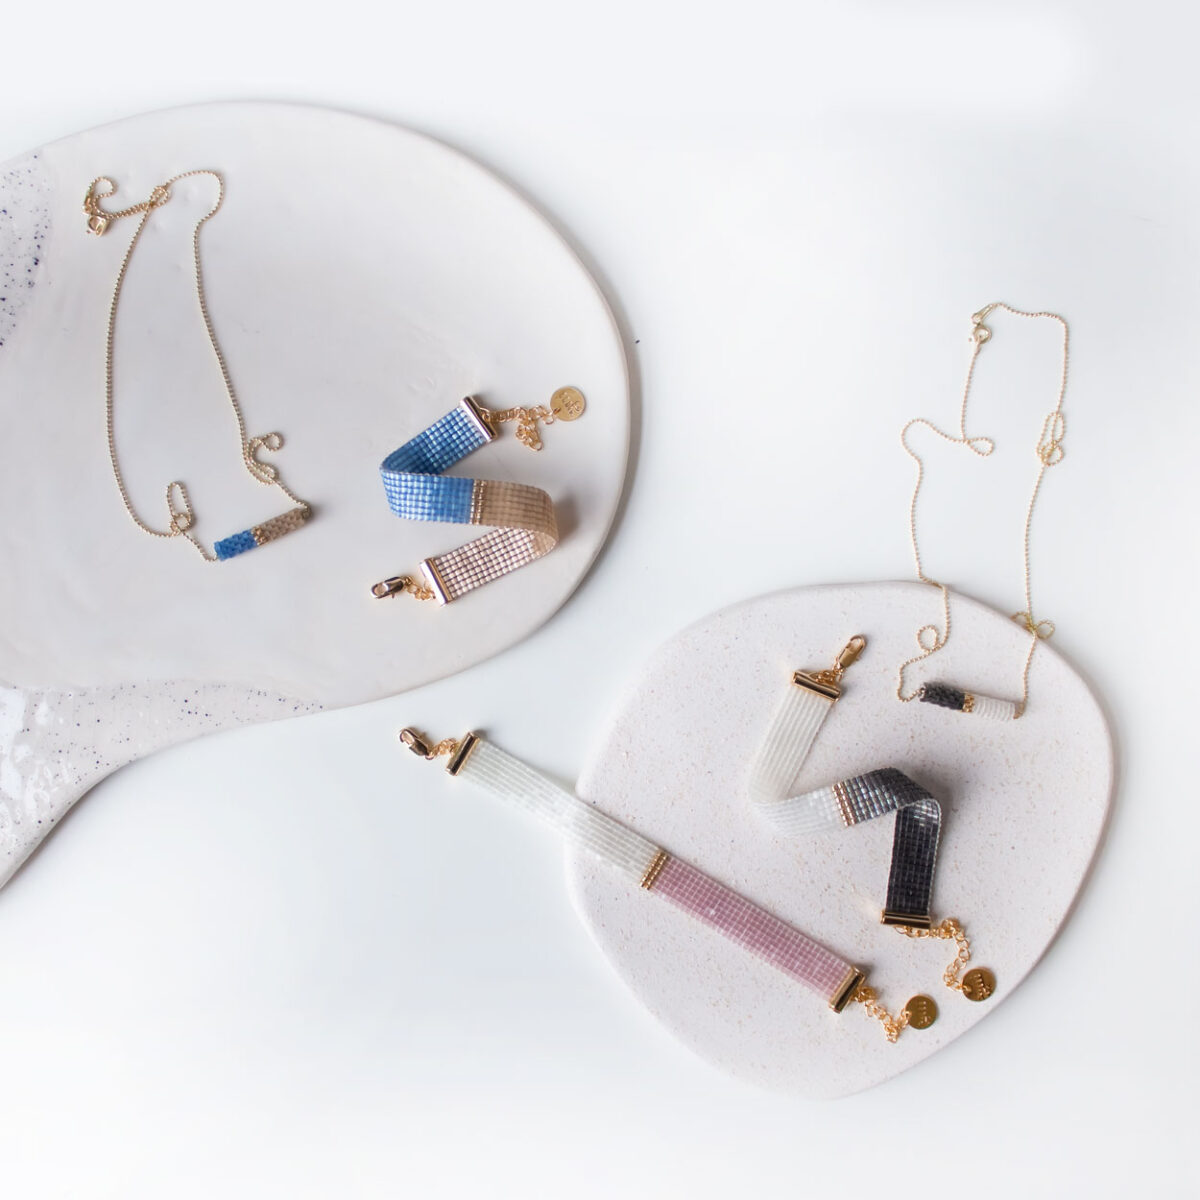 Elegant bracelets and necklaces displayed on a white ceramic plate.